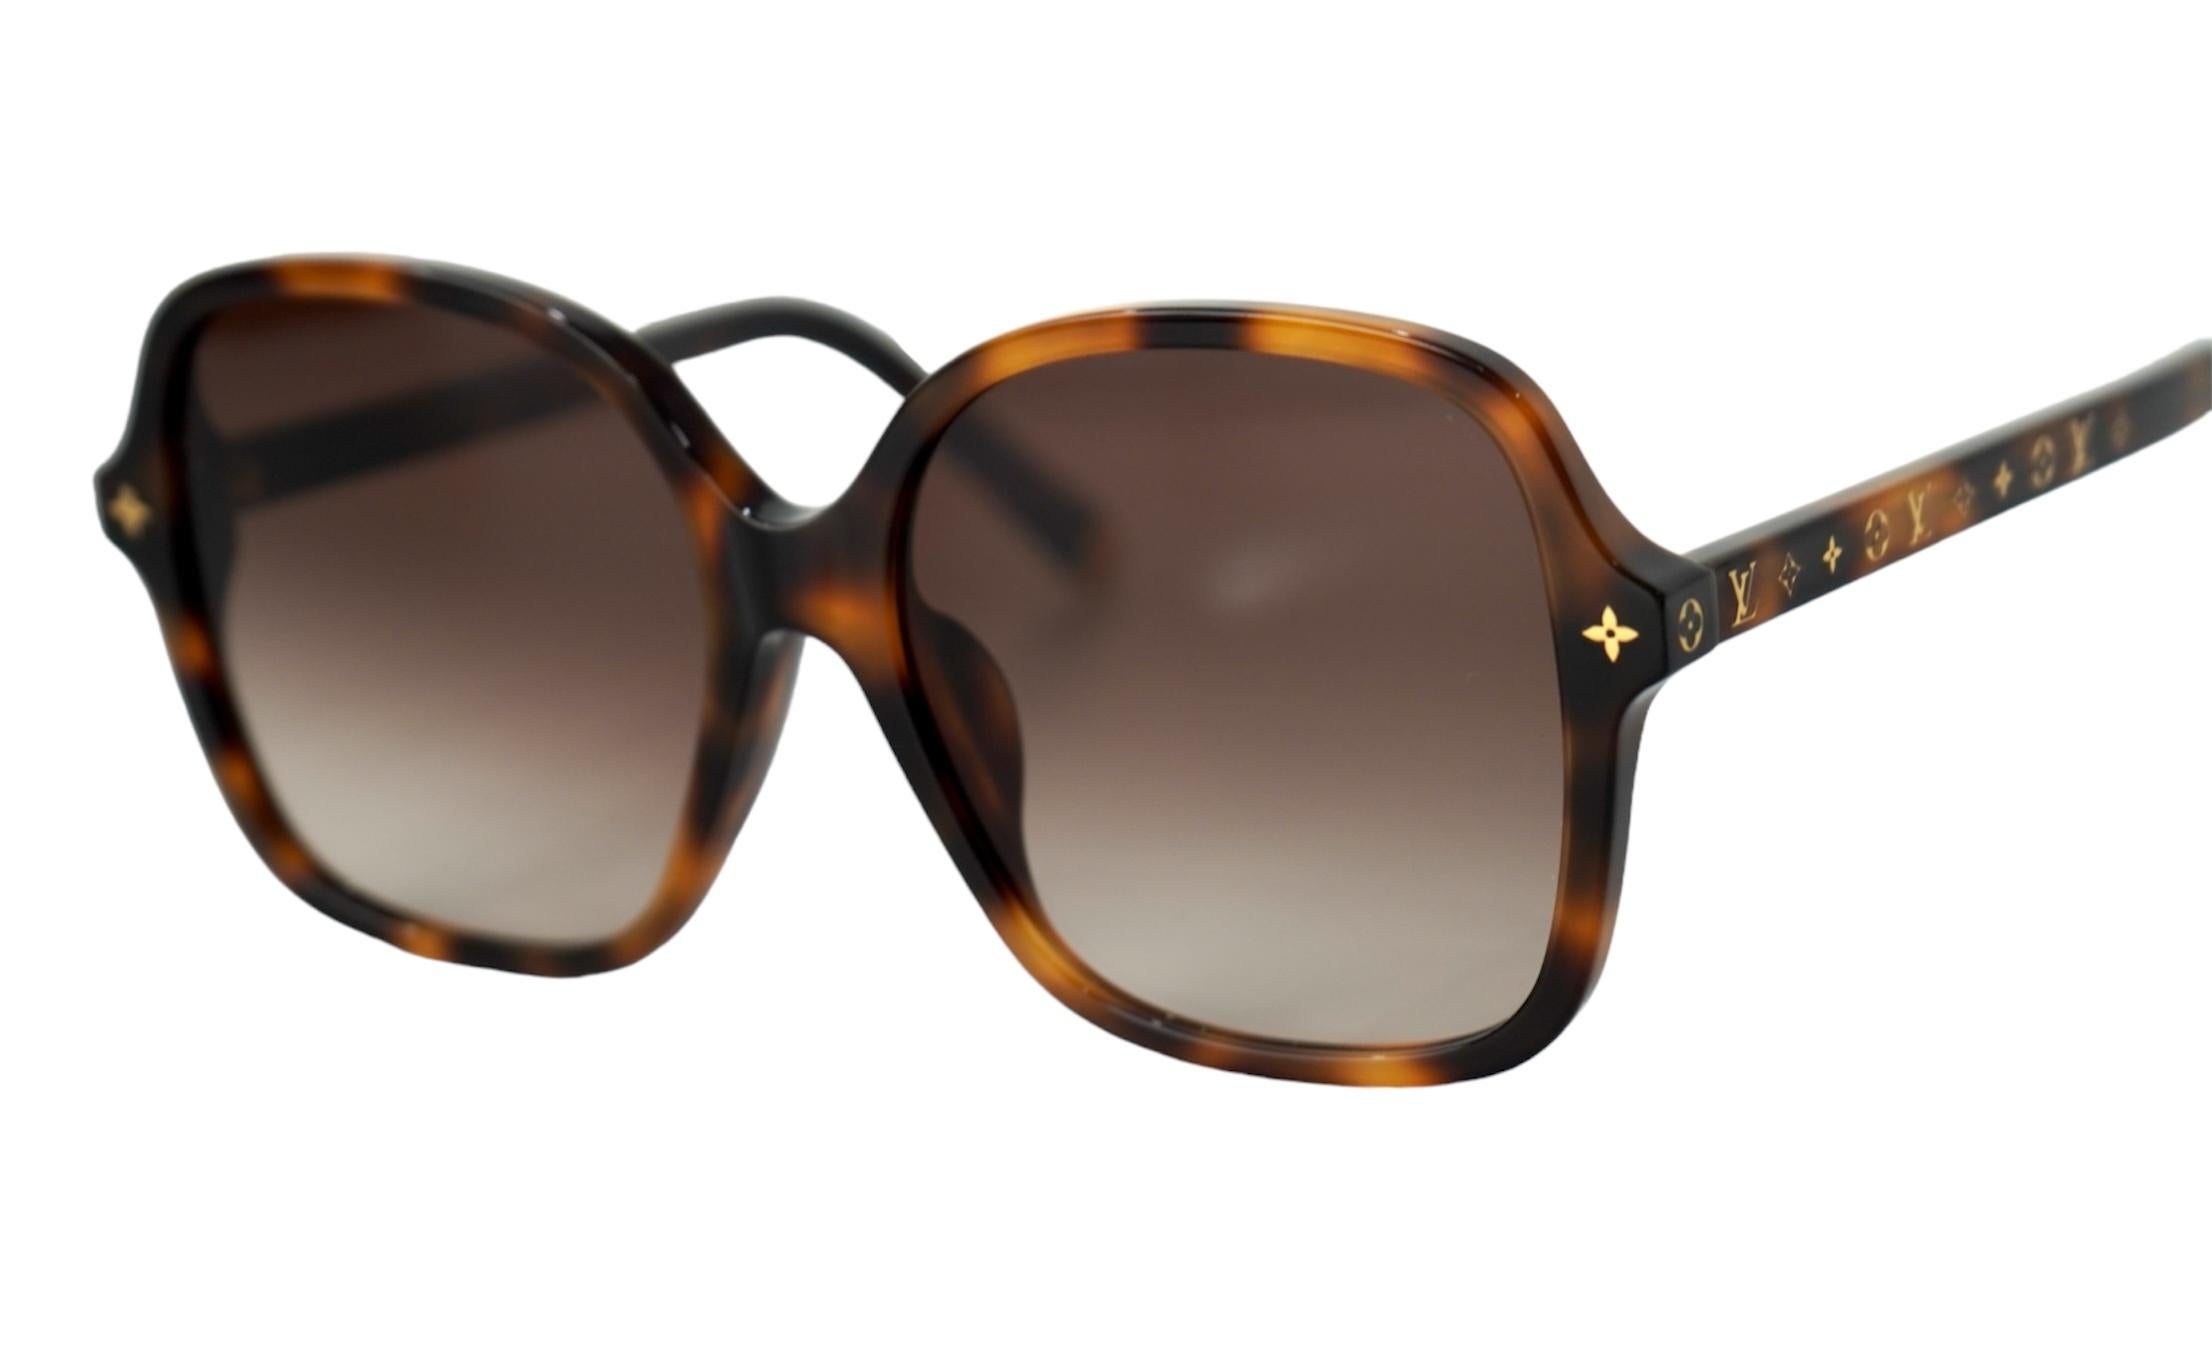 Louis Vuitton Monogram Brown Sunglasses In Excellent Condition For Sale In Beverly Hills, CA